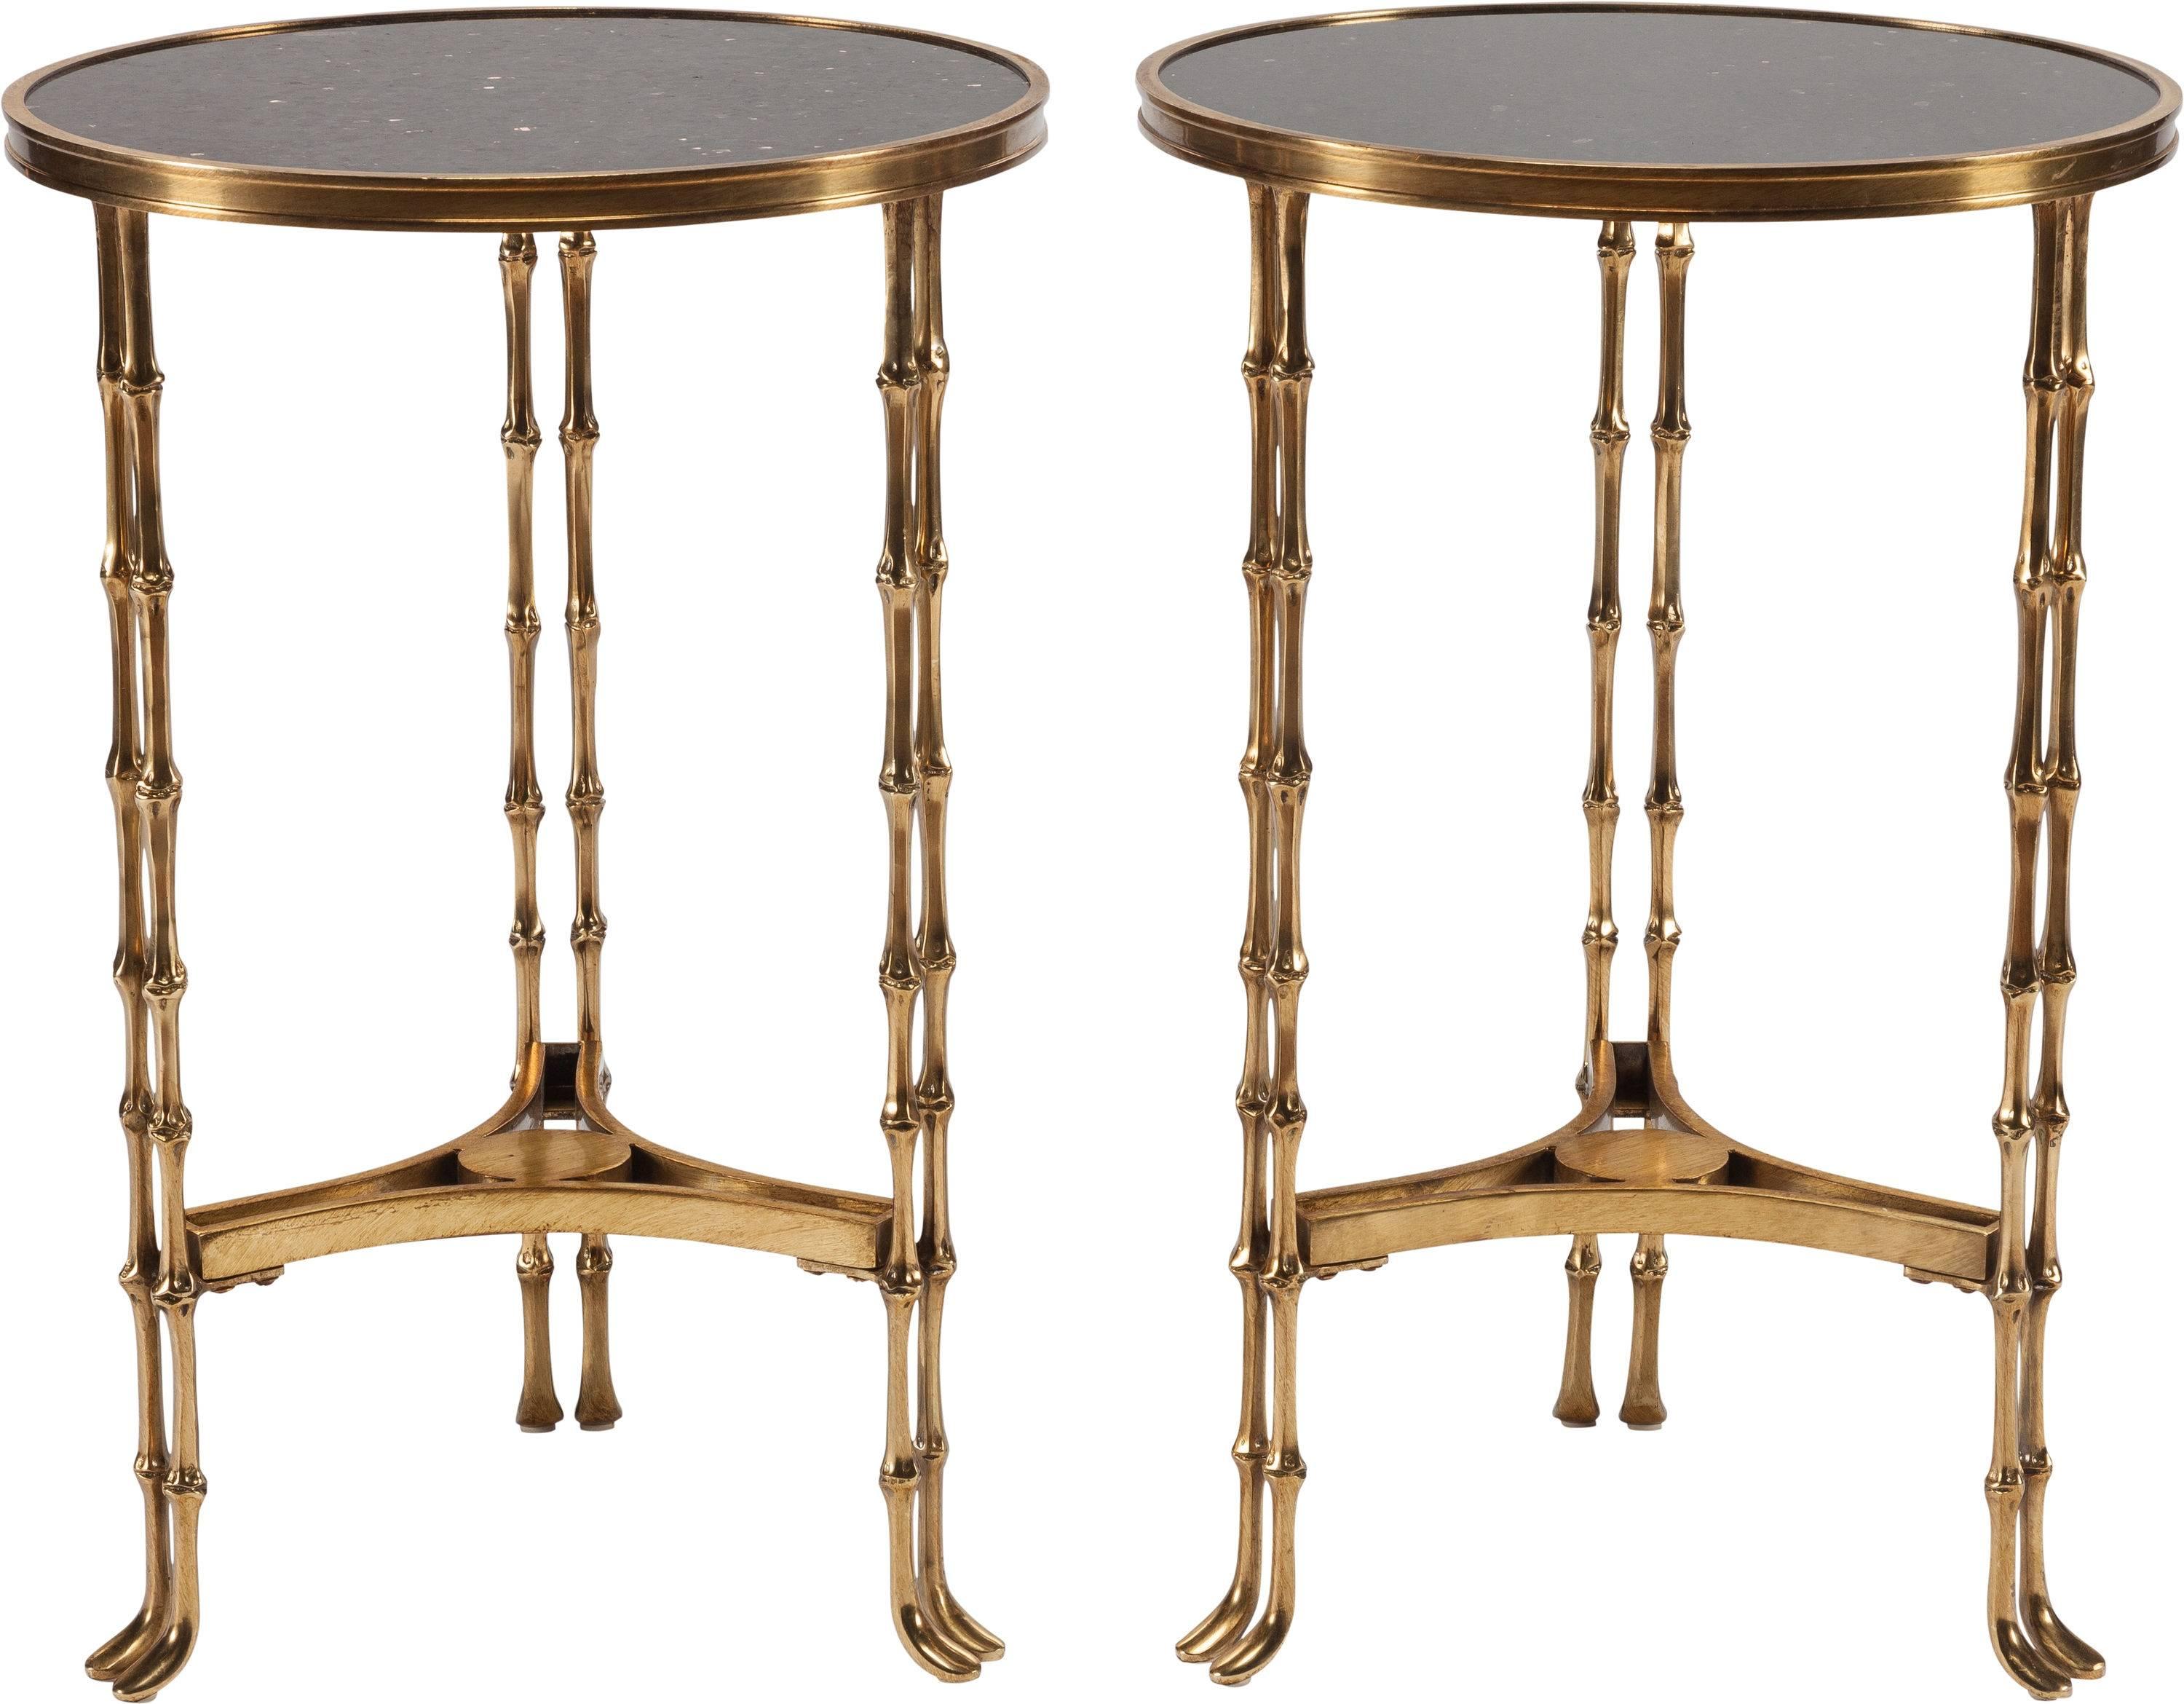 Elegant antique pair of neoclassical bronze doré and granite side tables; crafted in France, circa 1900, both tables feature 